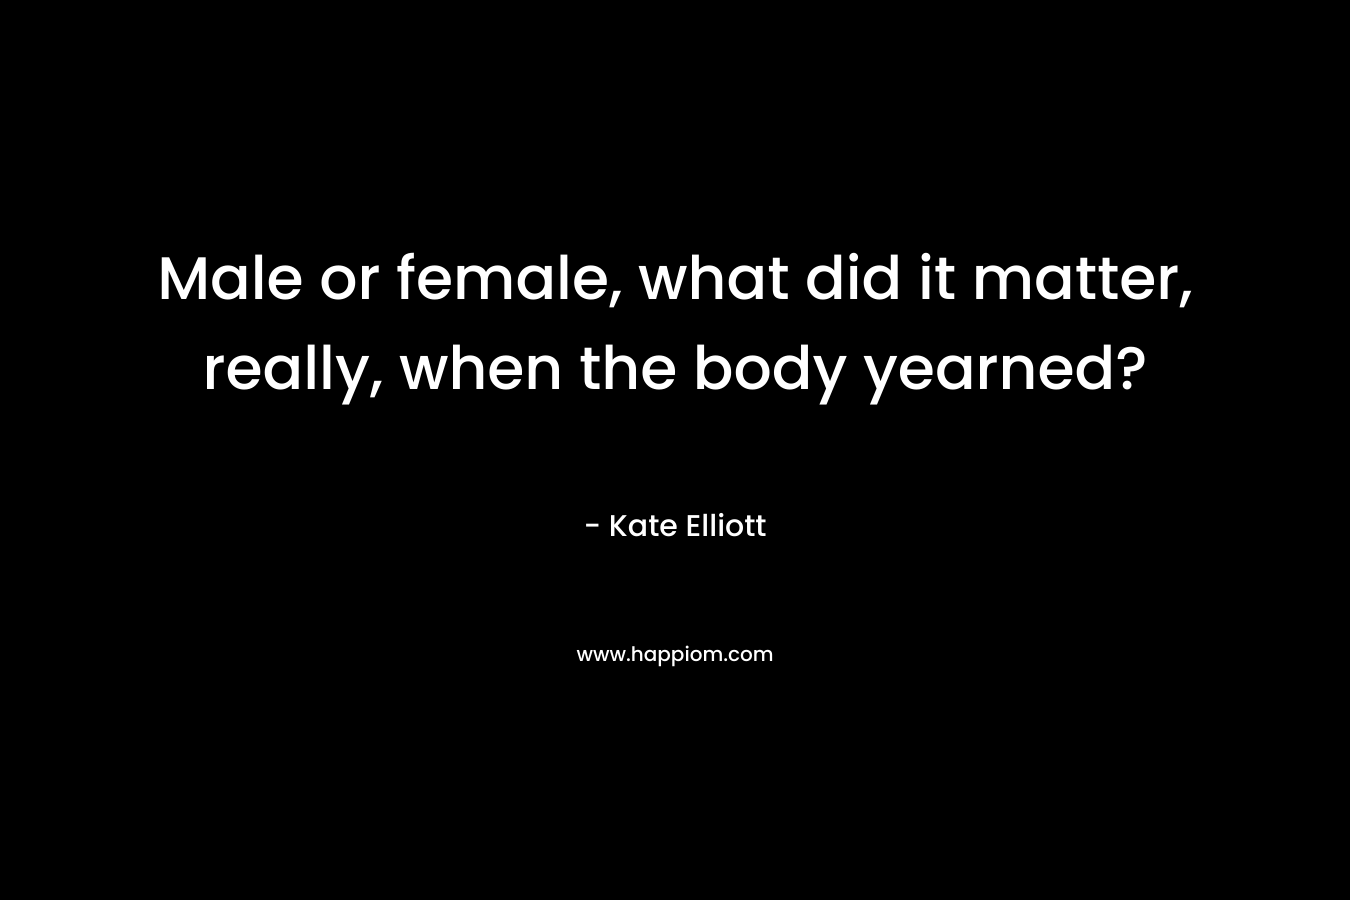 Male or female, what did it matter, really, when the body yearned? – Kate Elliott